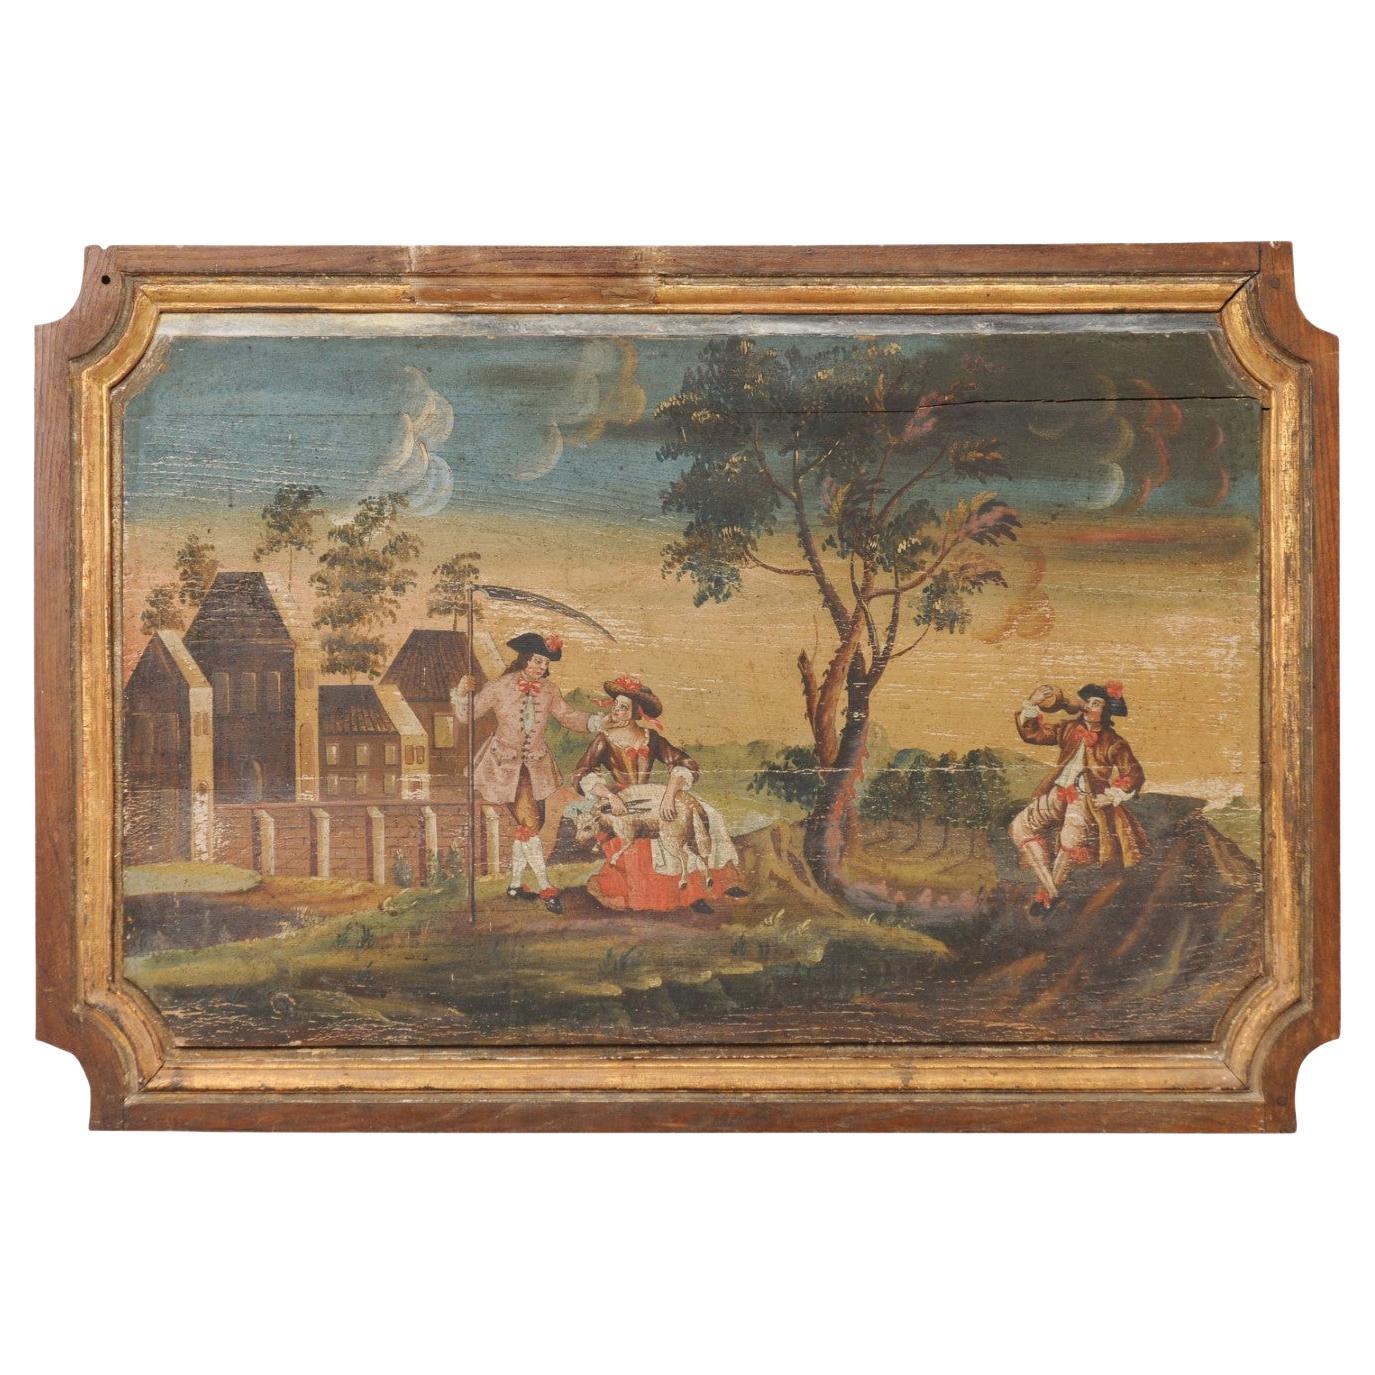 19th C. French Landscape & Figures Painting on Wooden Plaque (4+ Ft Wide) For Sale